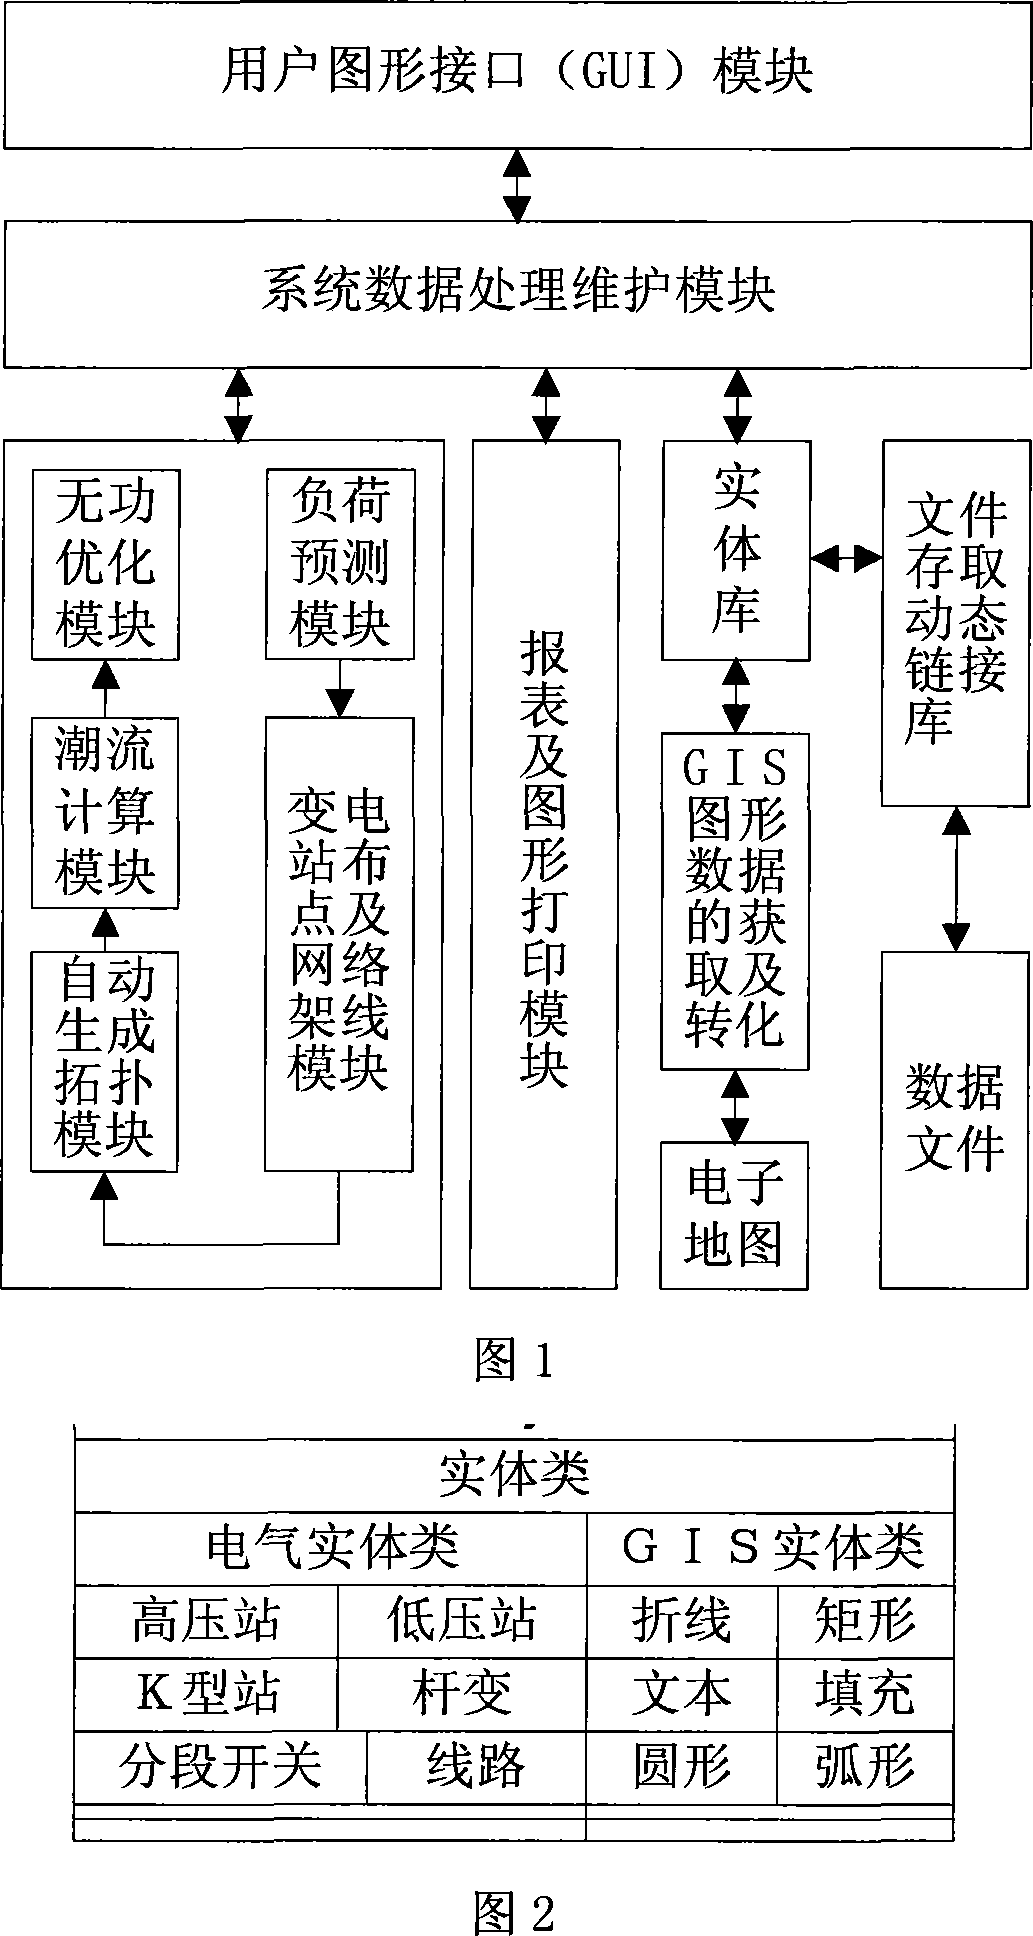 Electrified wire netting layout computer auxiliary decision-making support system